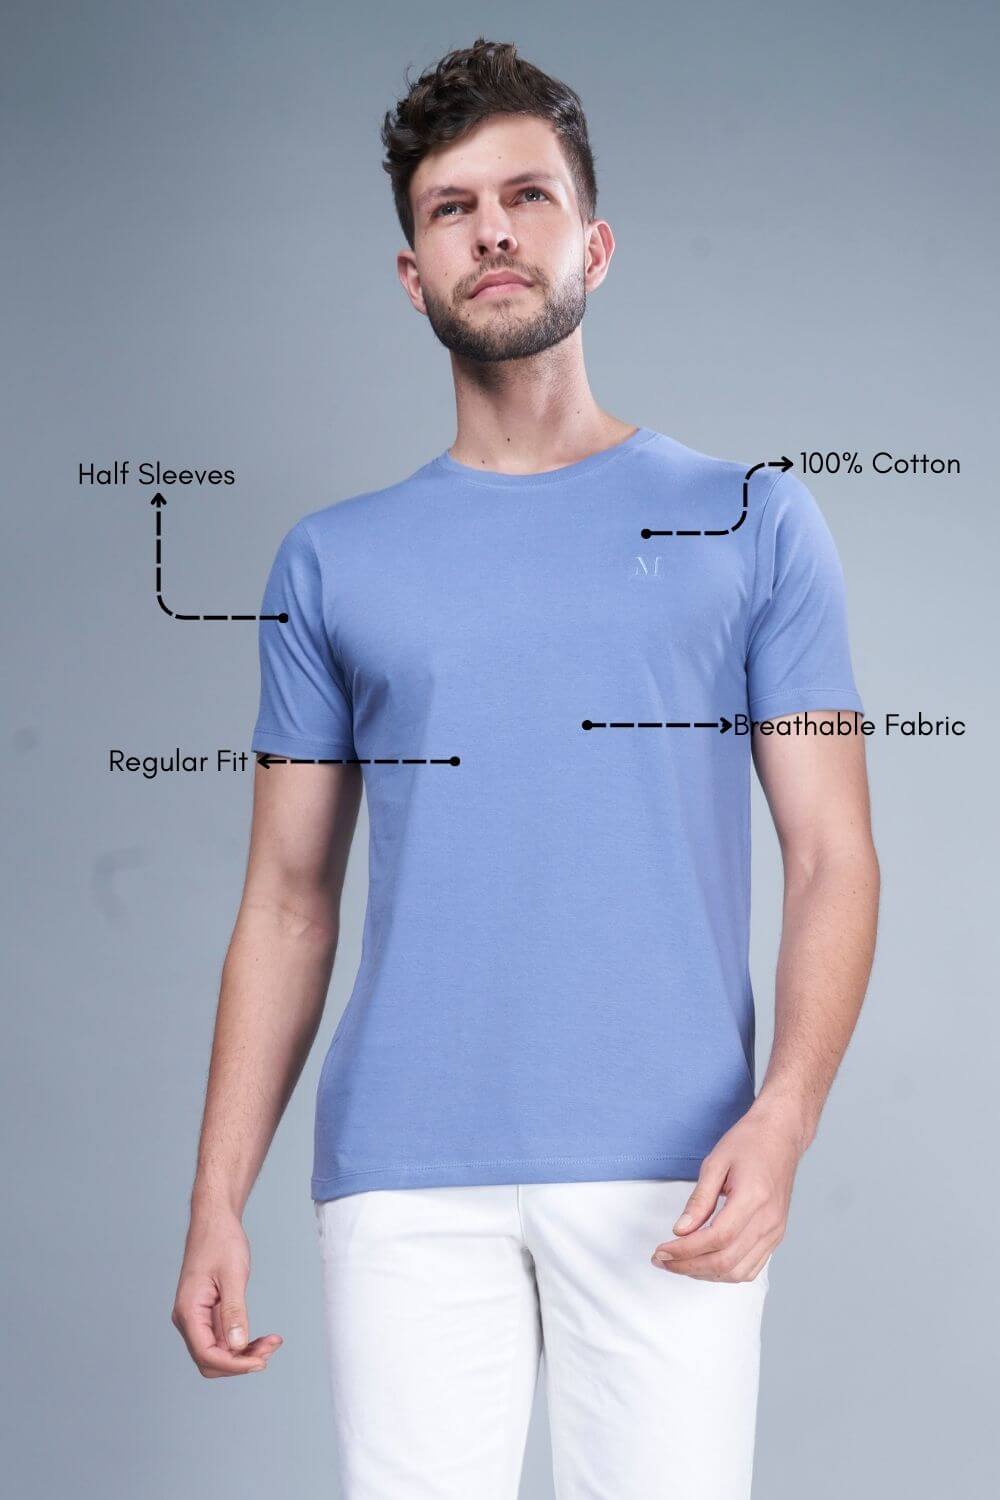 Blue colored, cotton solid T shirt for men with half sleeves and round neck from vibgyor series collection, product description.